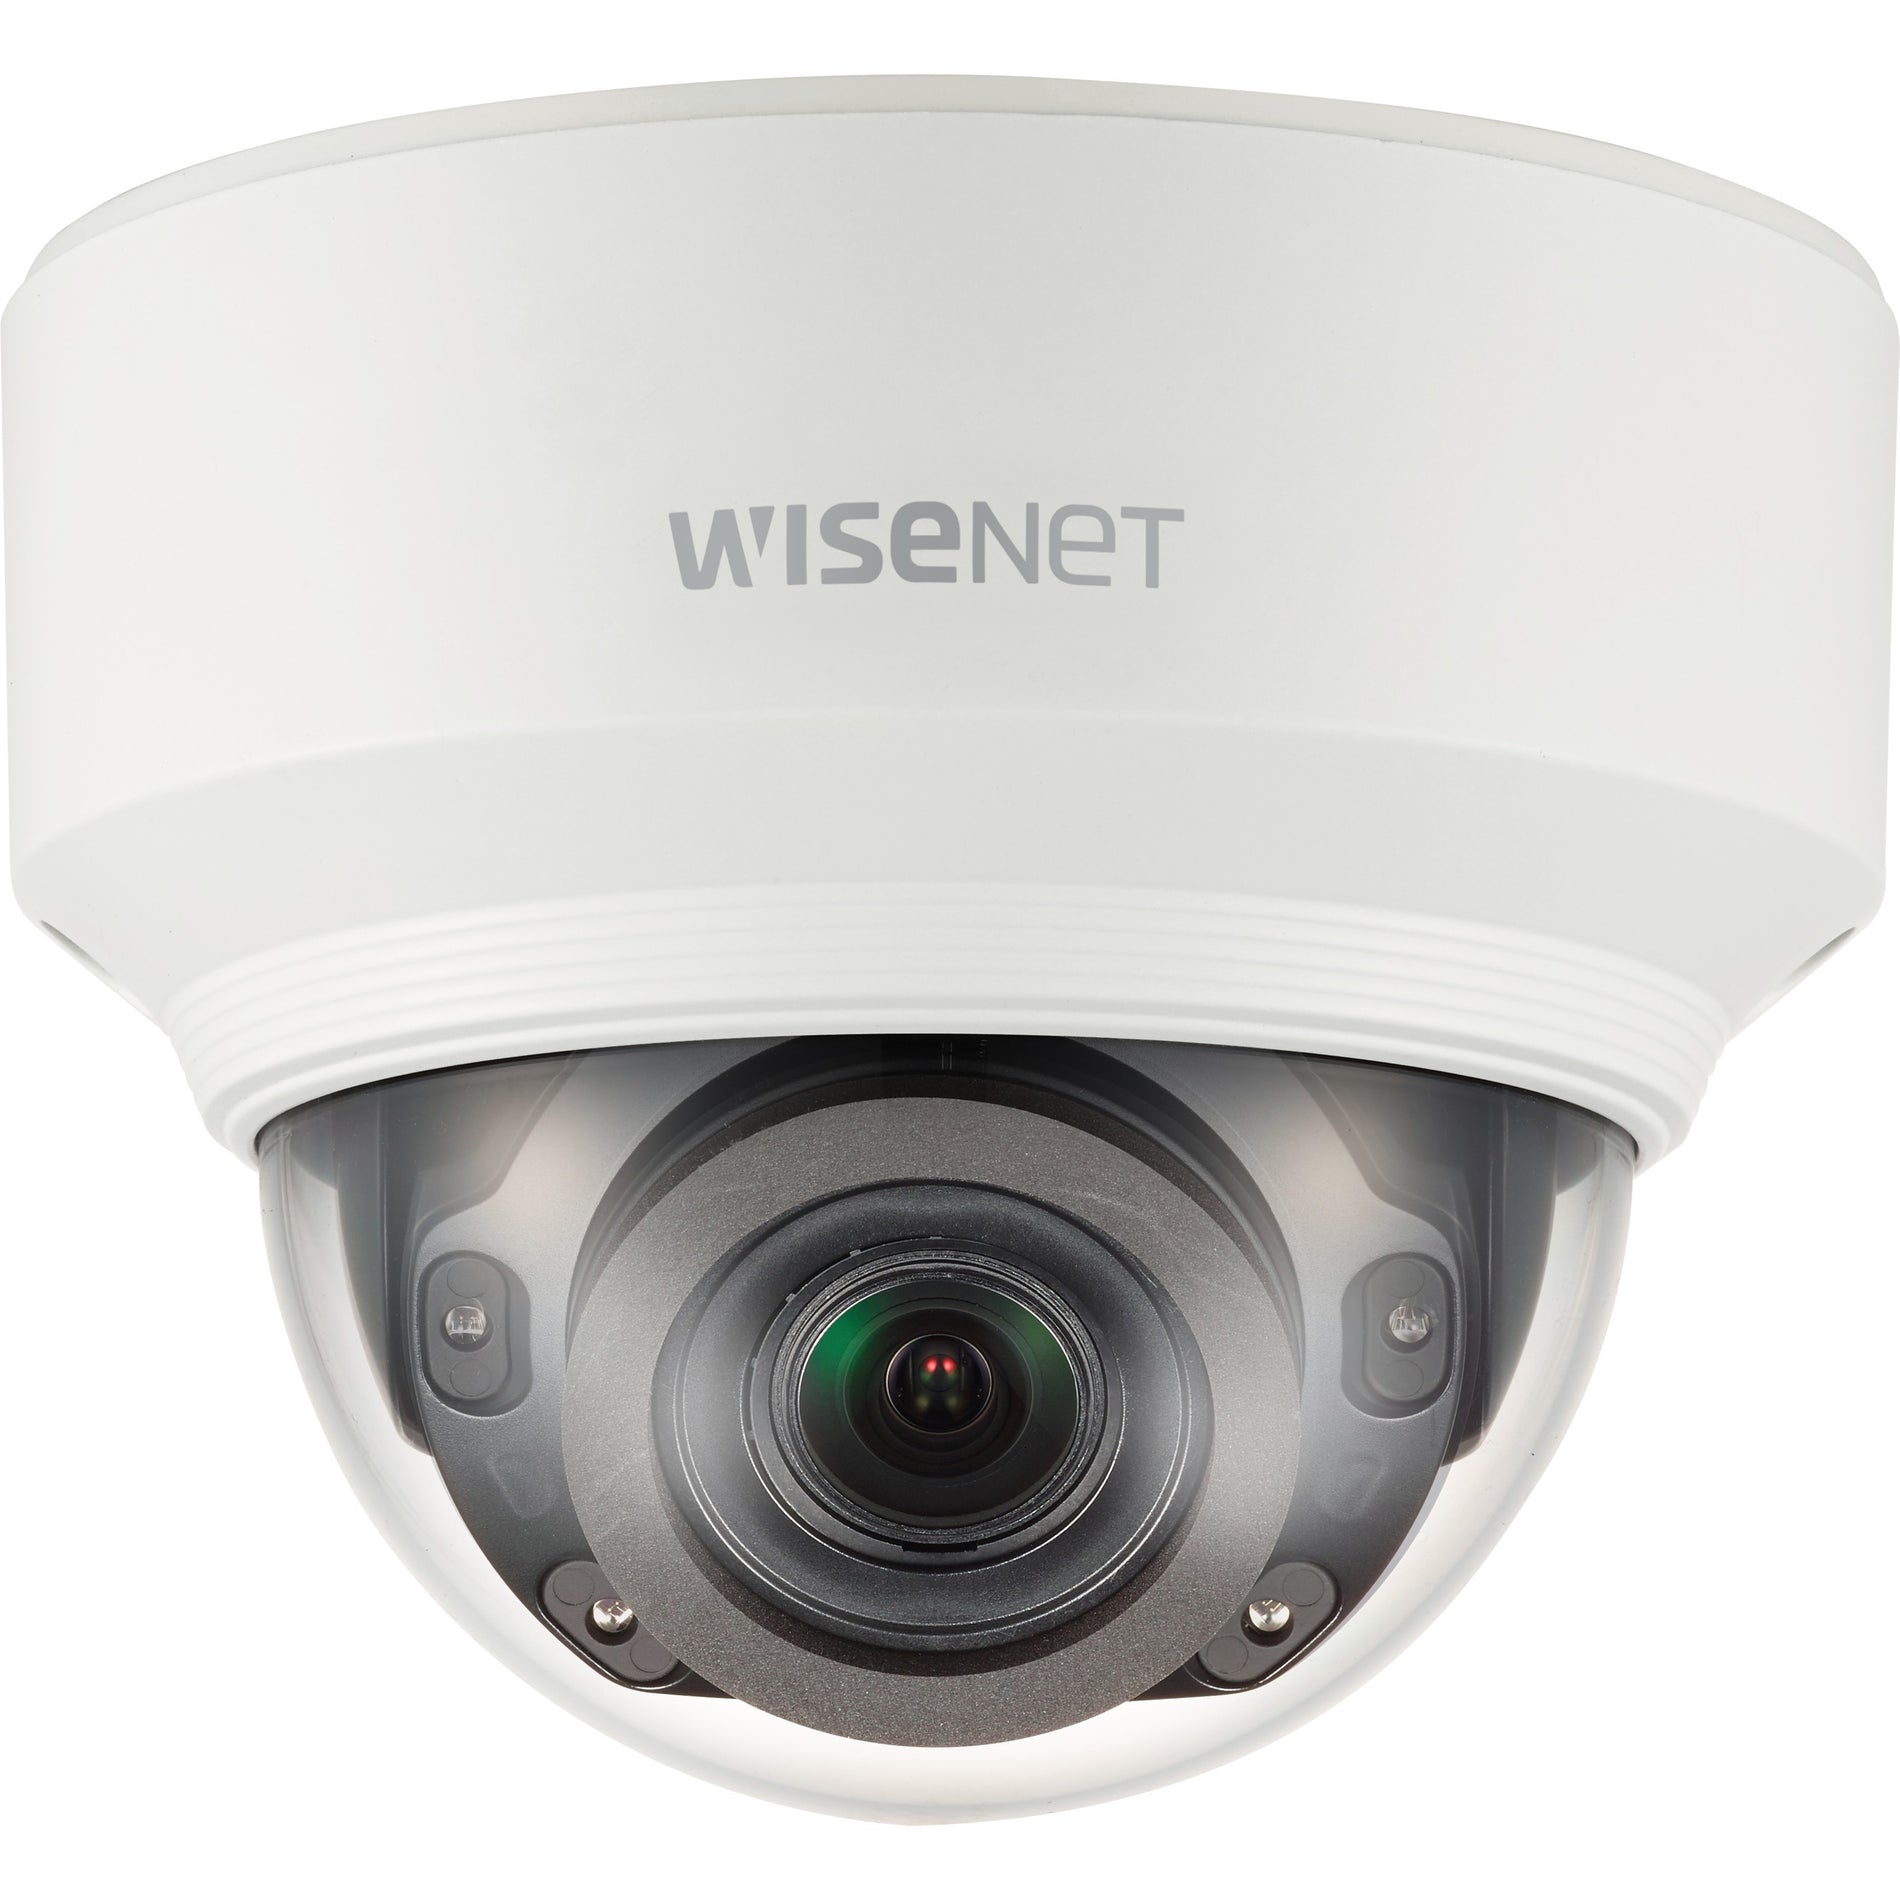 Wisenet XND-8080RV 4 Megapixel Full HD Network Camera, Color Dome, Varifocal Lens, 2.4x Optical Zoom, Memory Card Storage, 30 fps, 2560 x 1920 Video Resolution